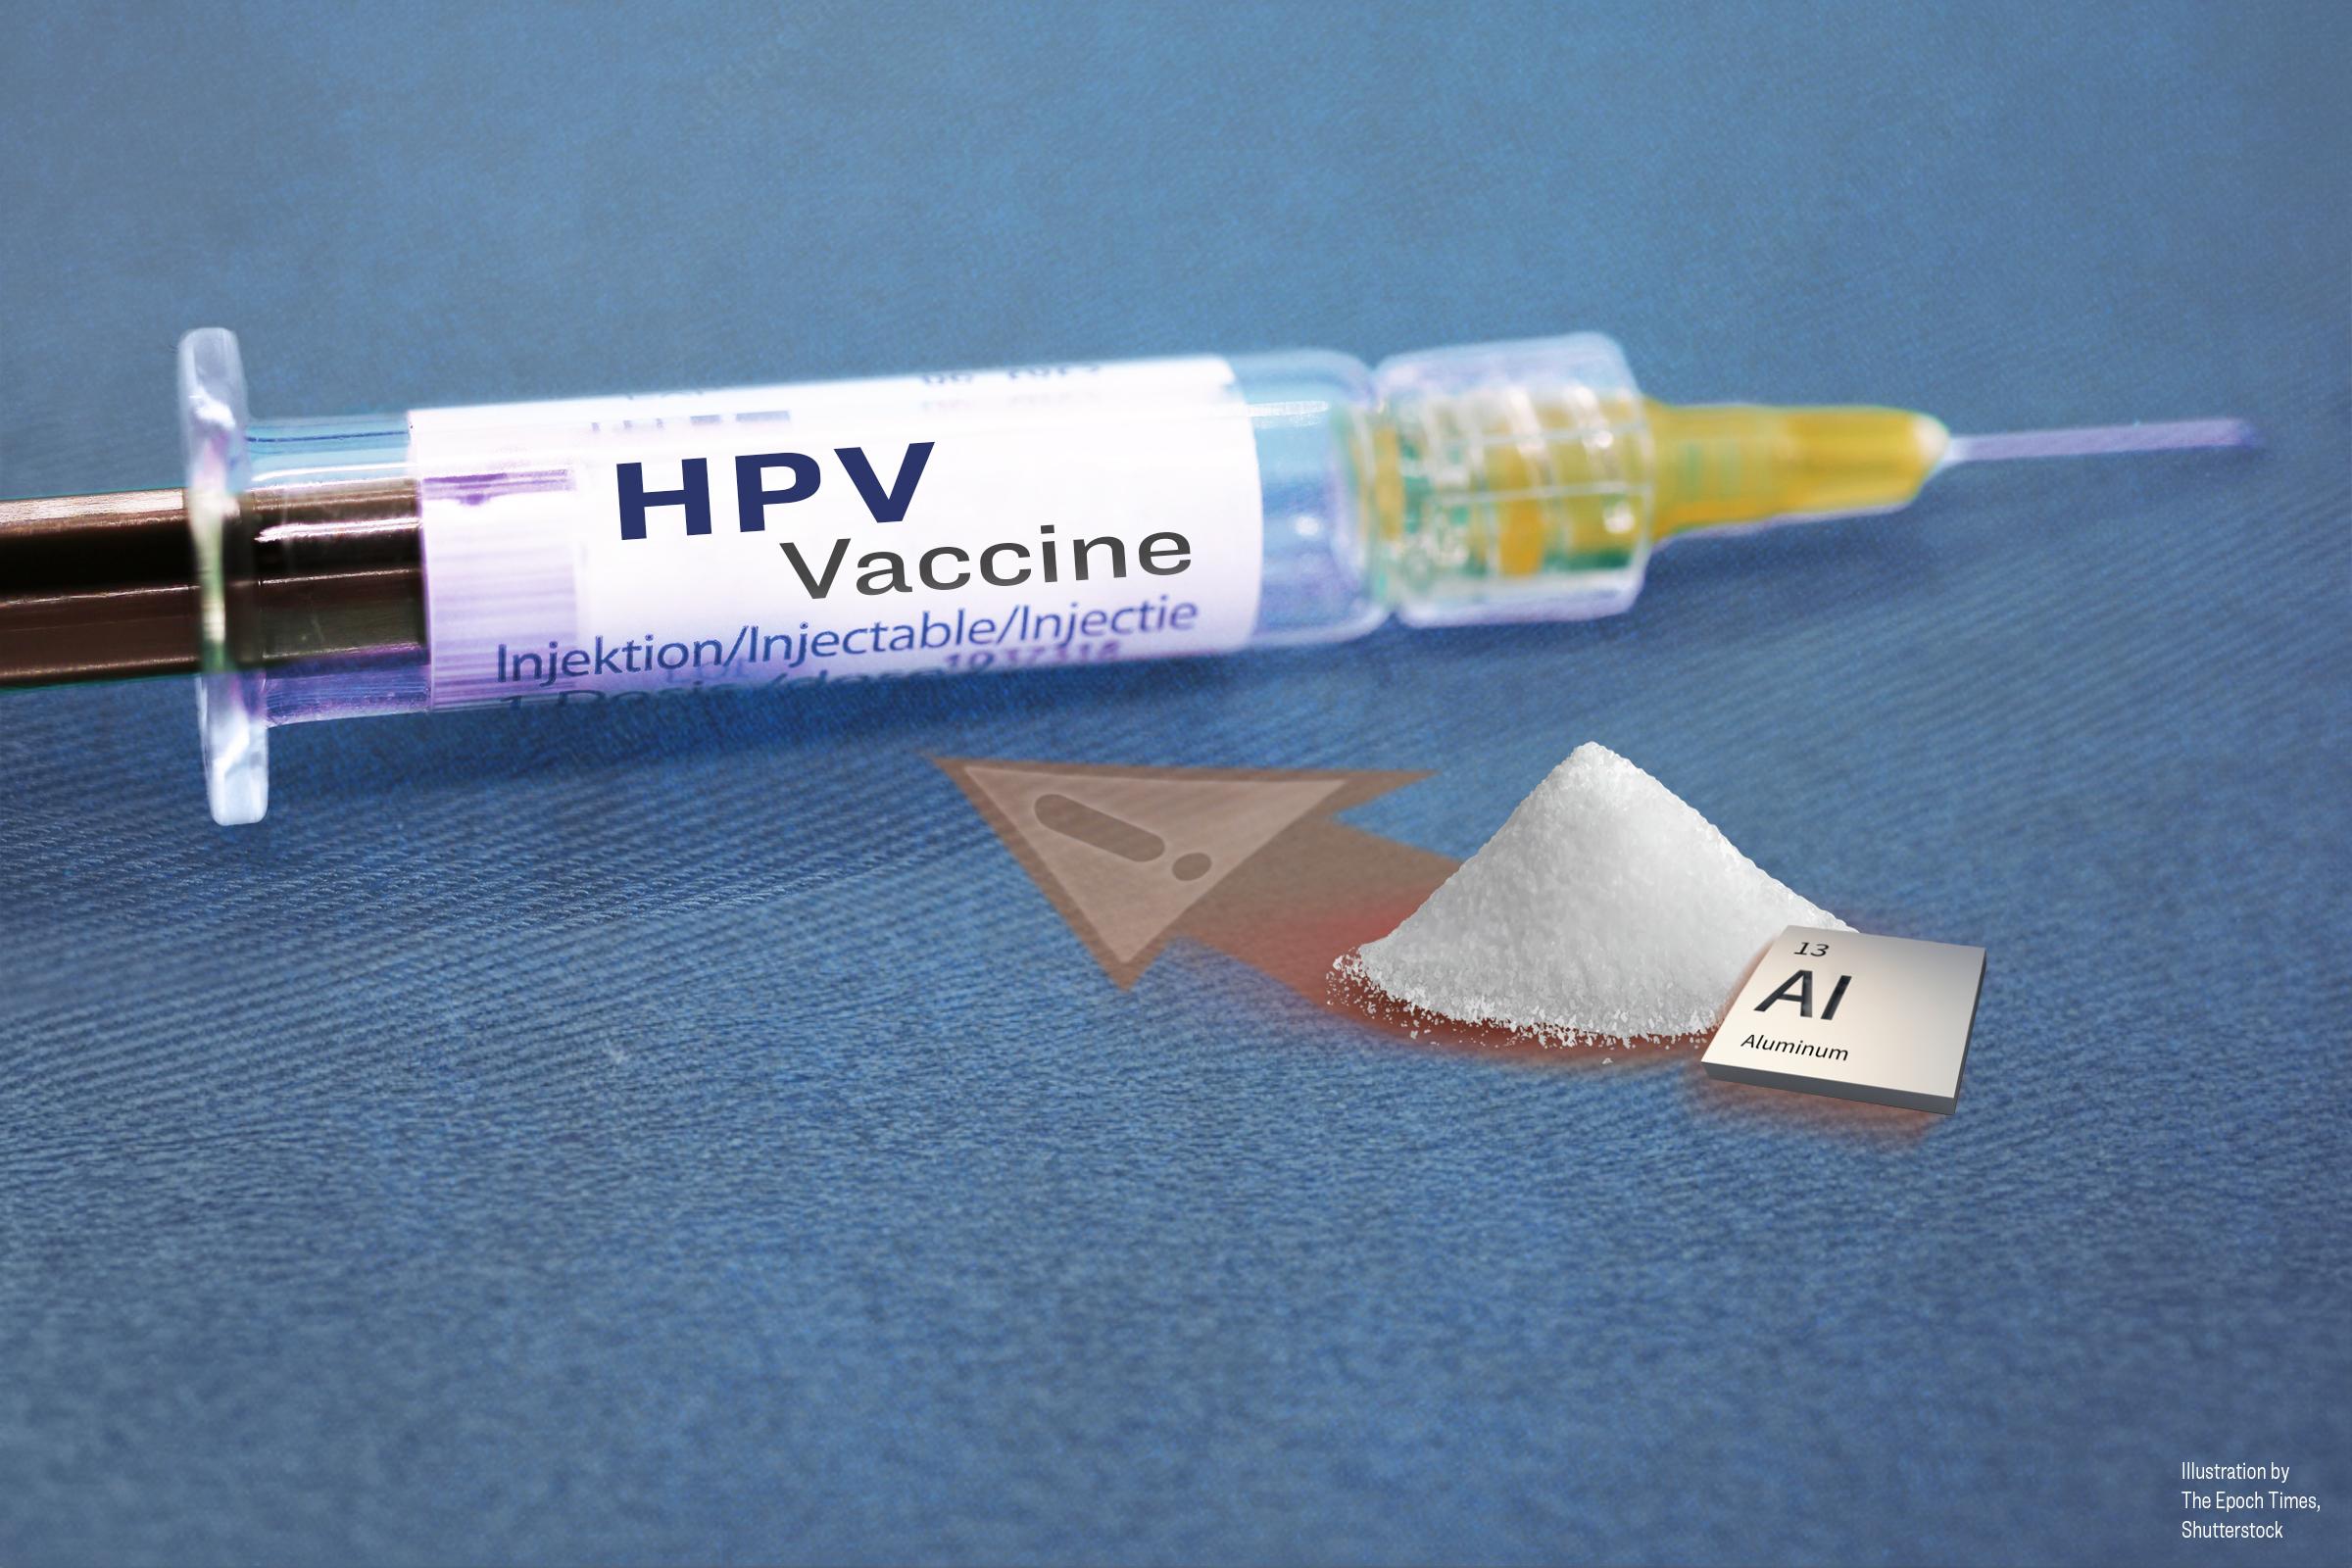 Undeniable Toxic Ingredients in HPV Vaccines